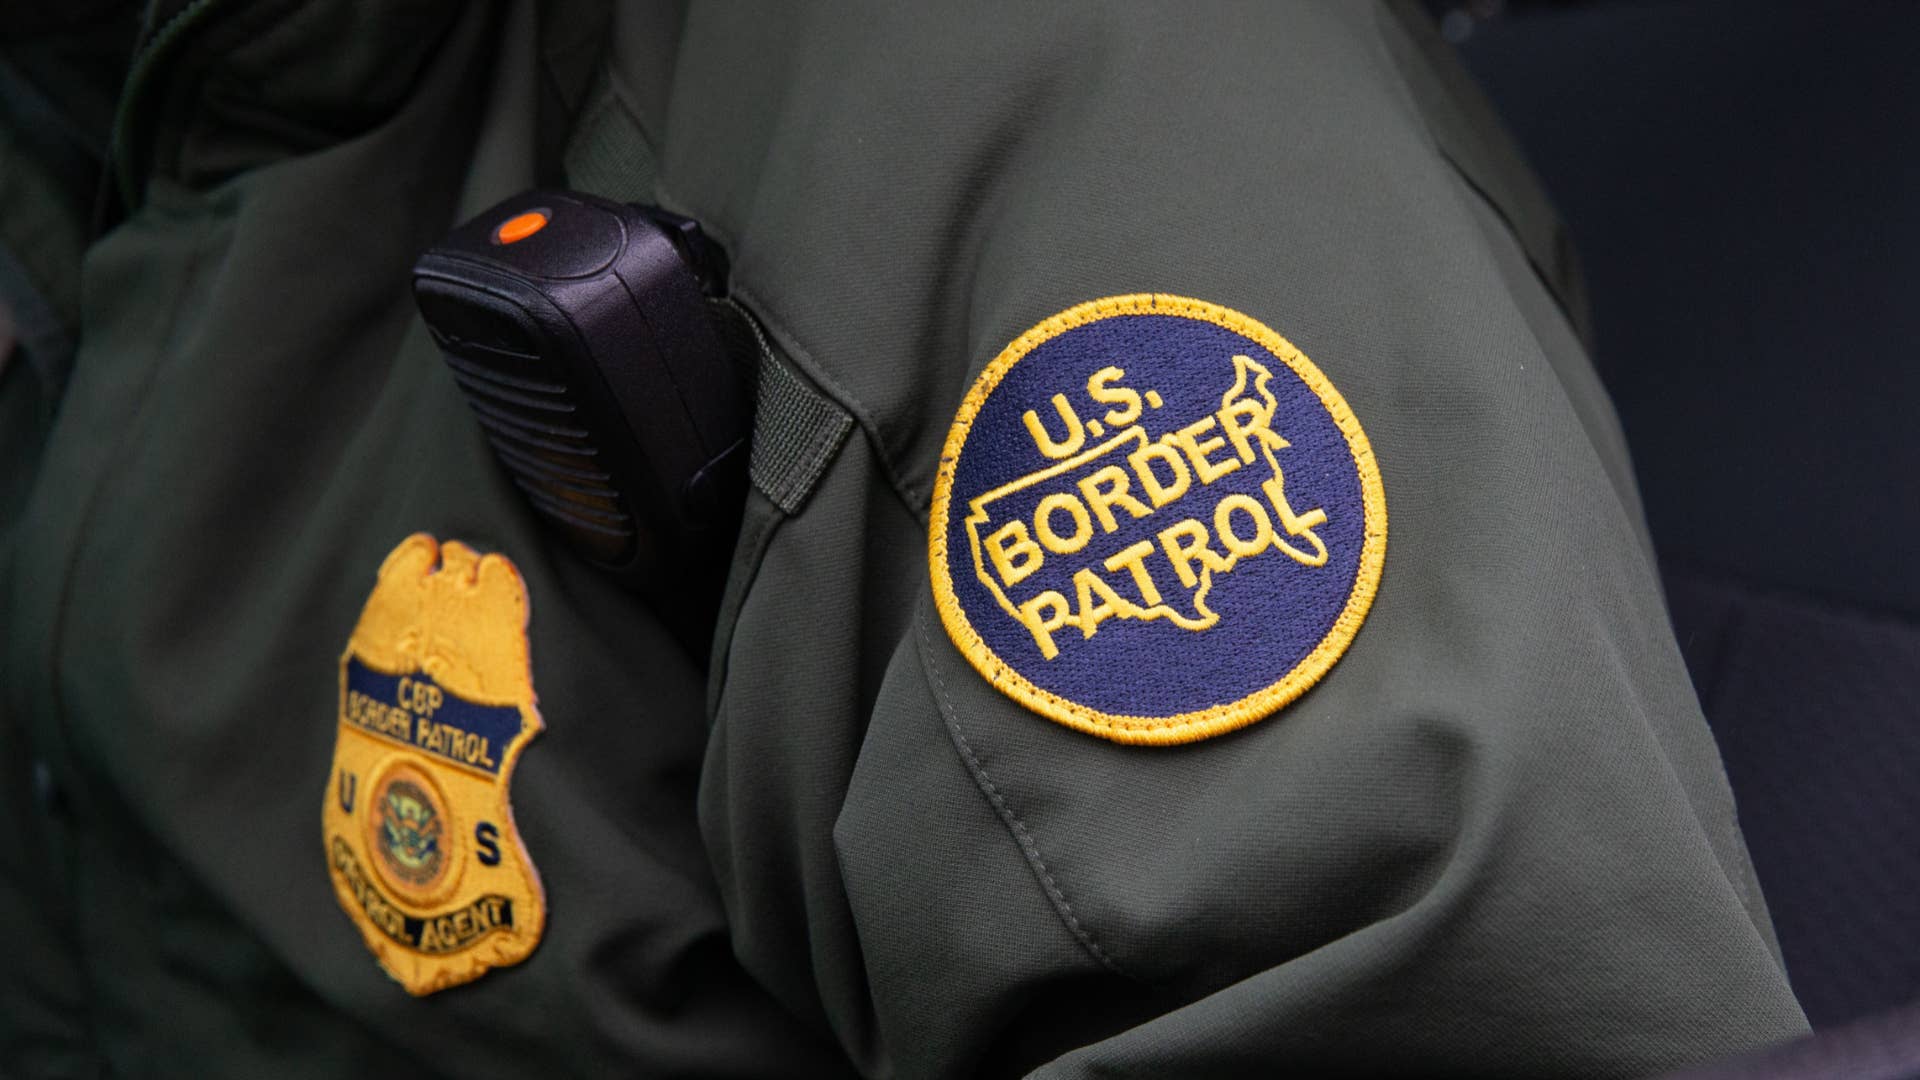 This photo shows US Border Patrol patch on a border agent's uniform in McAllen, Texas.